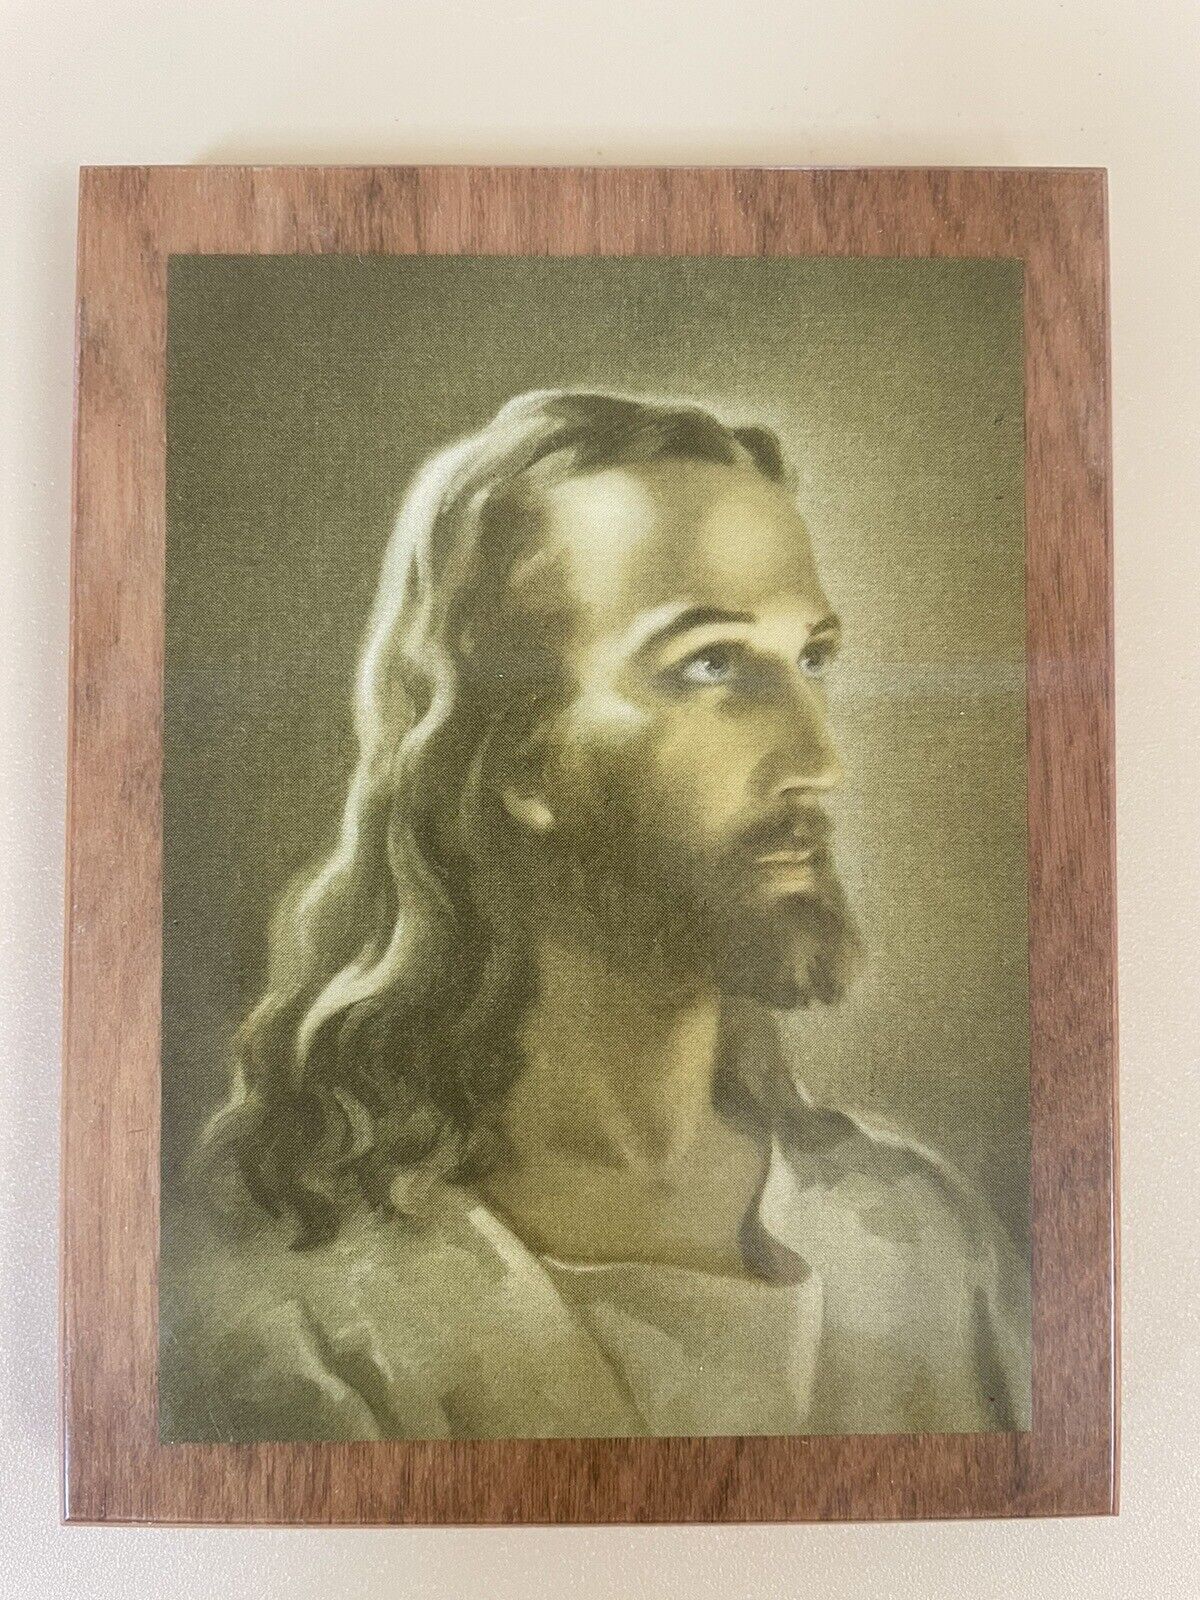 VTG Jesus Pyraglass Products Religious Wall Hanging Plaque Wood-4.75”x3.75x0.5”